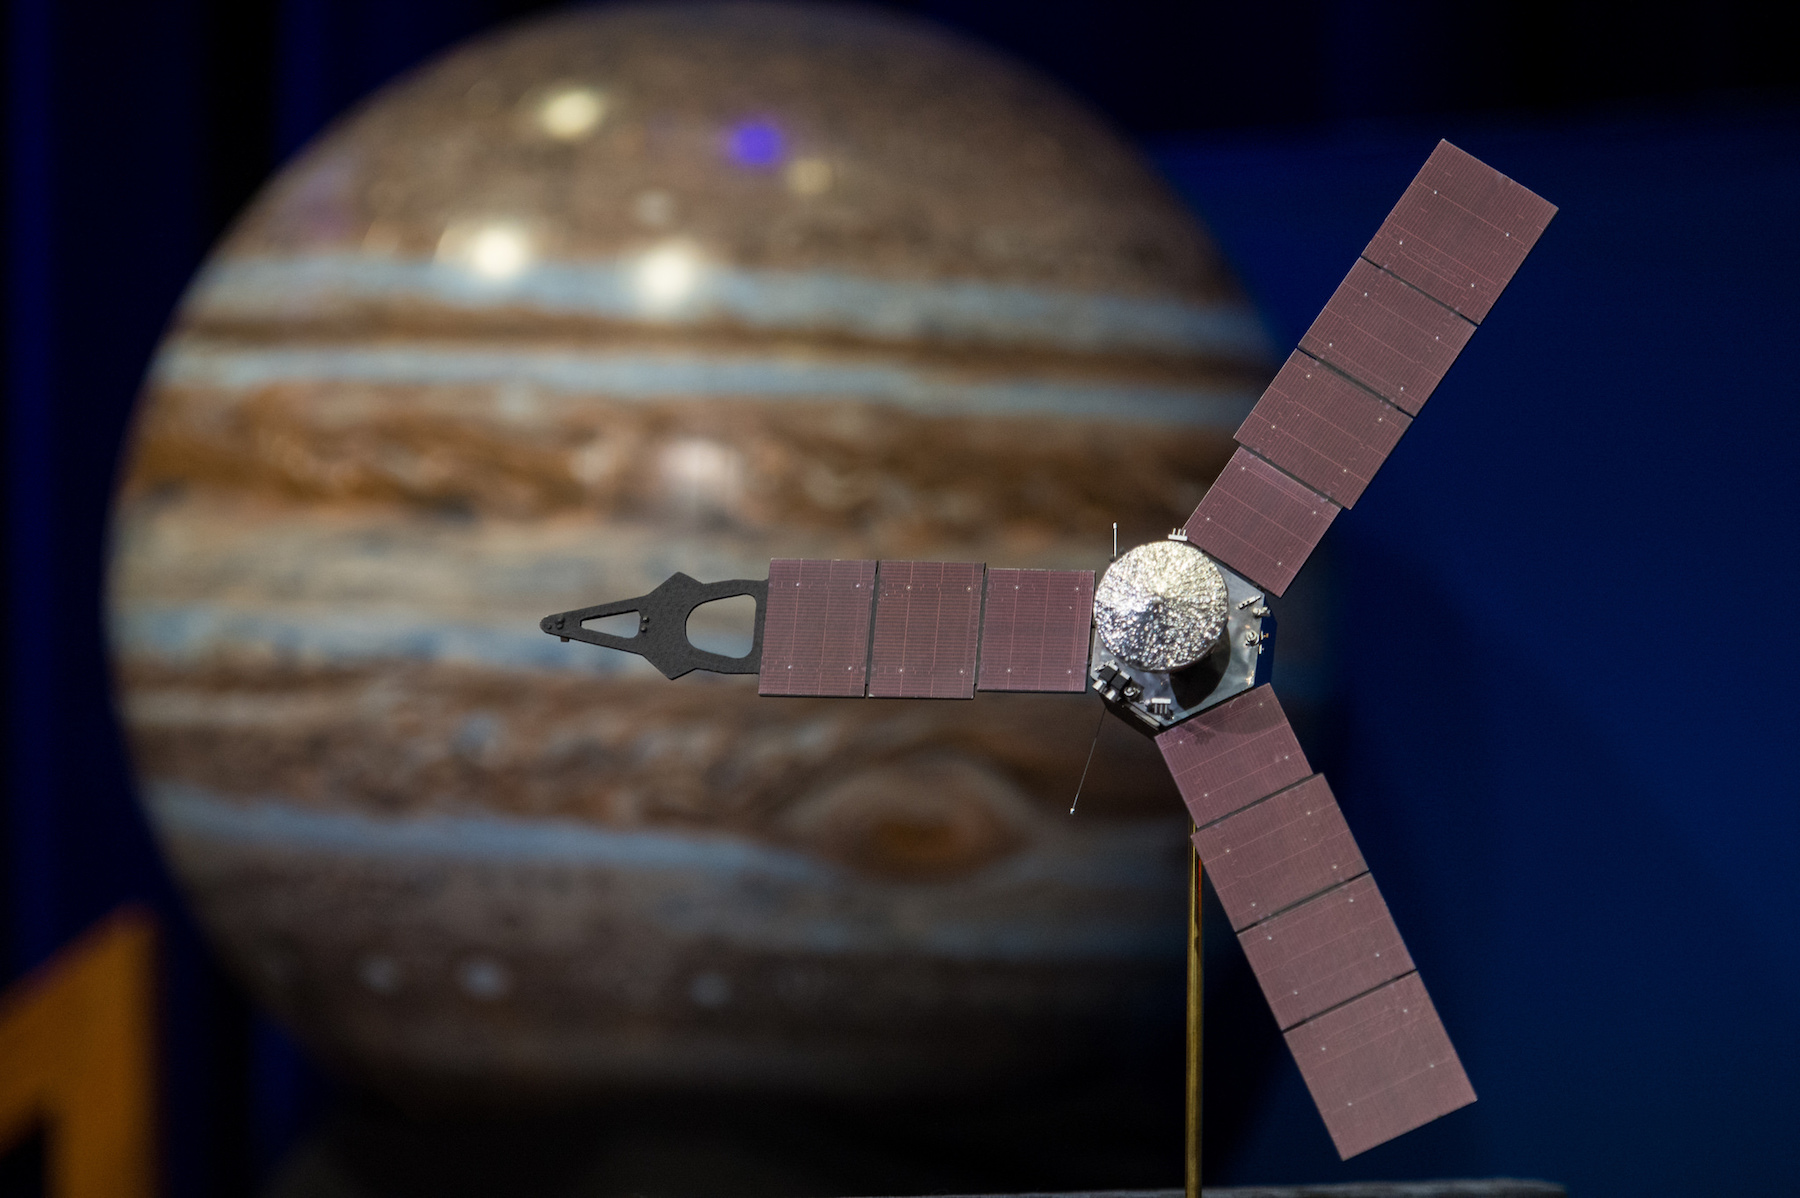 A model of the Juno spacecraft